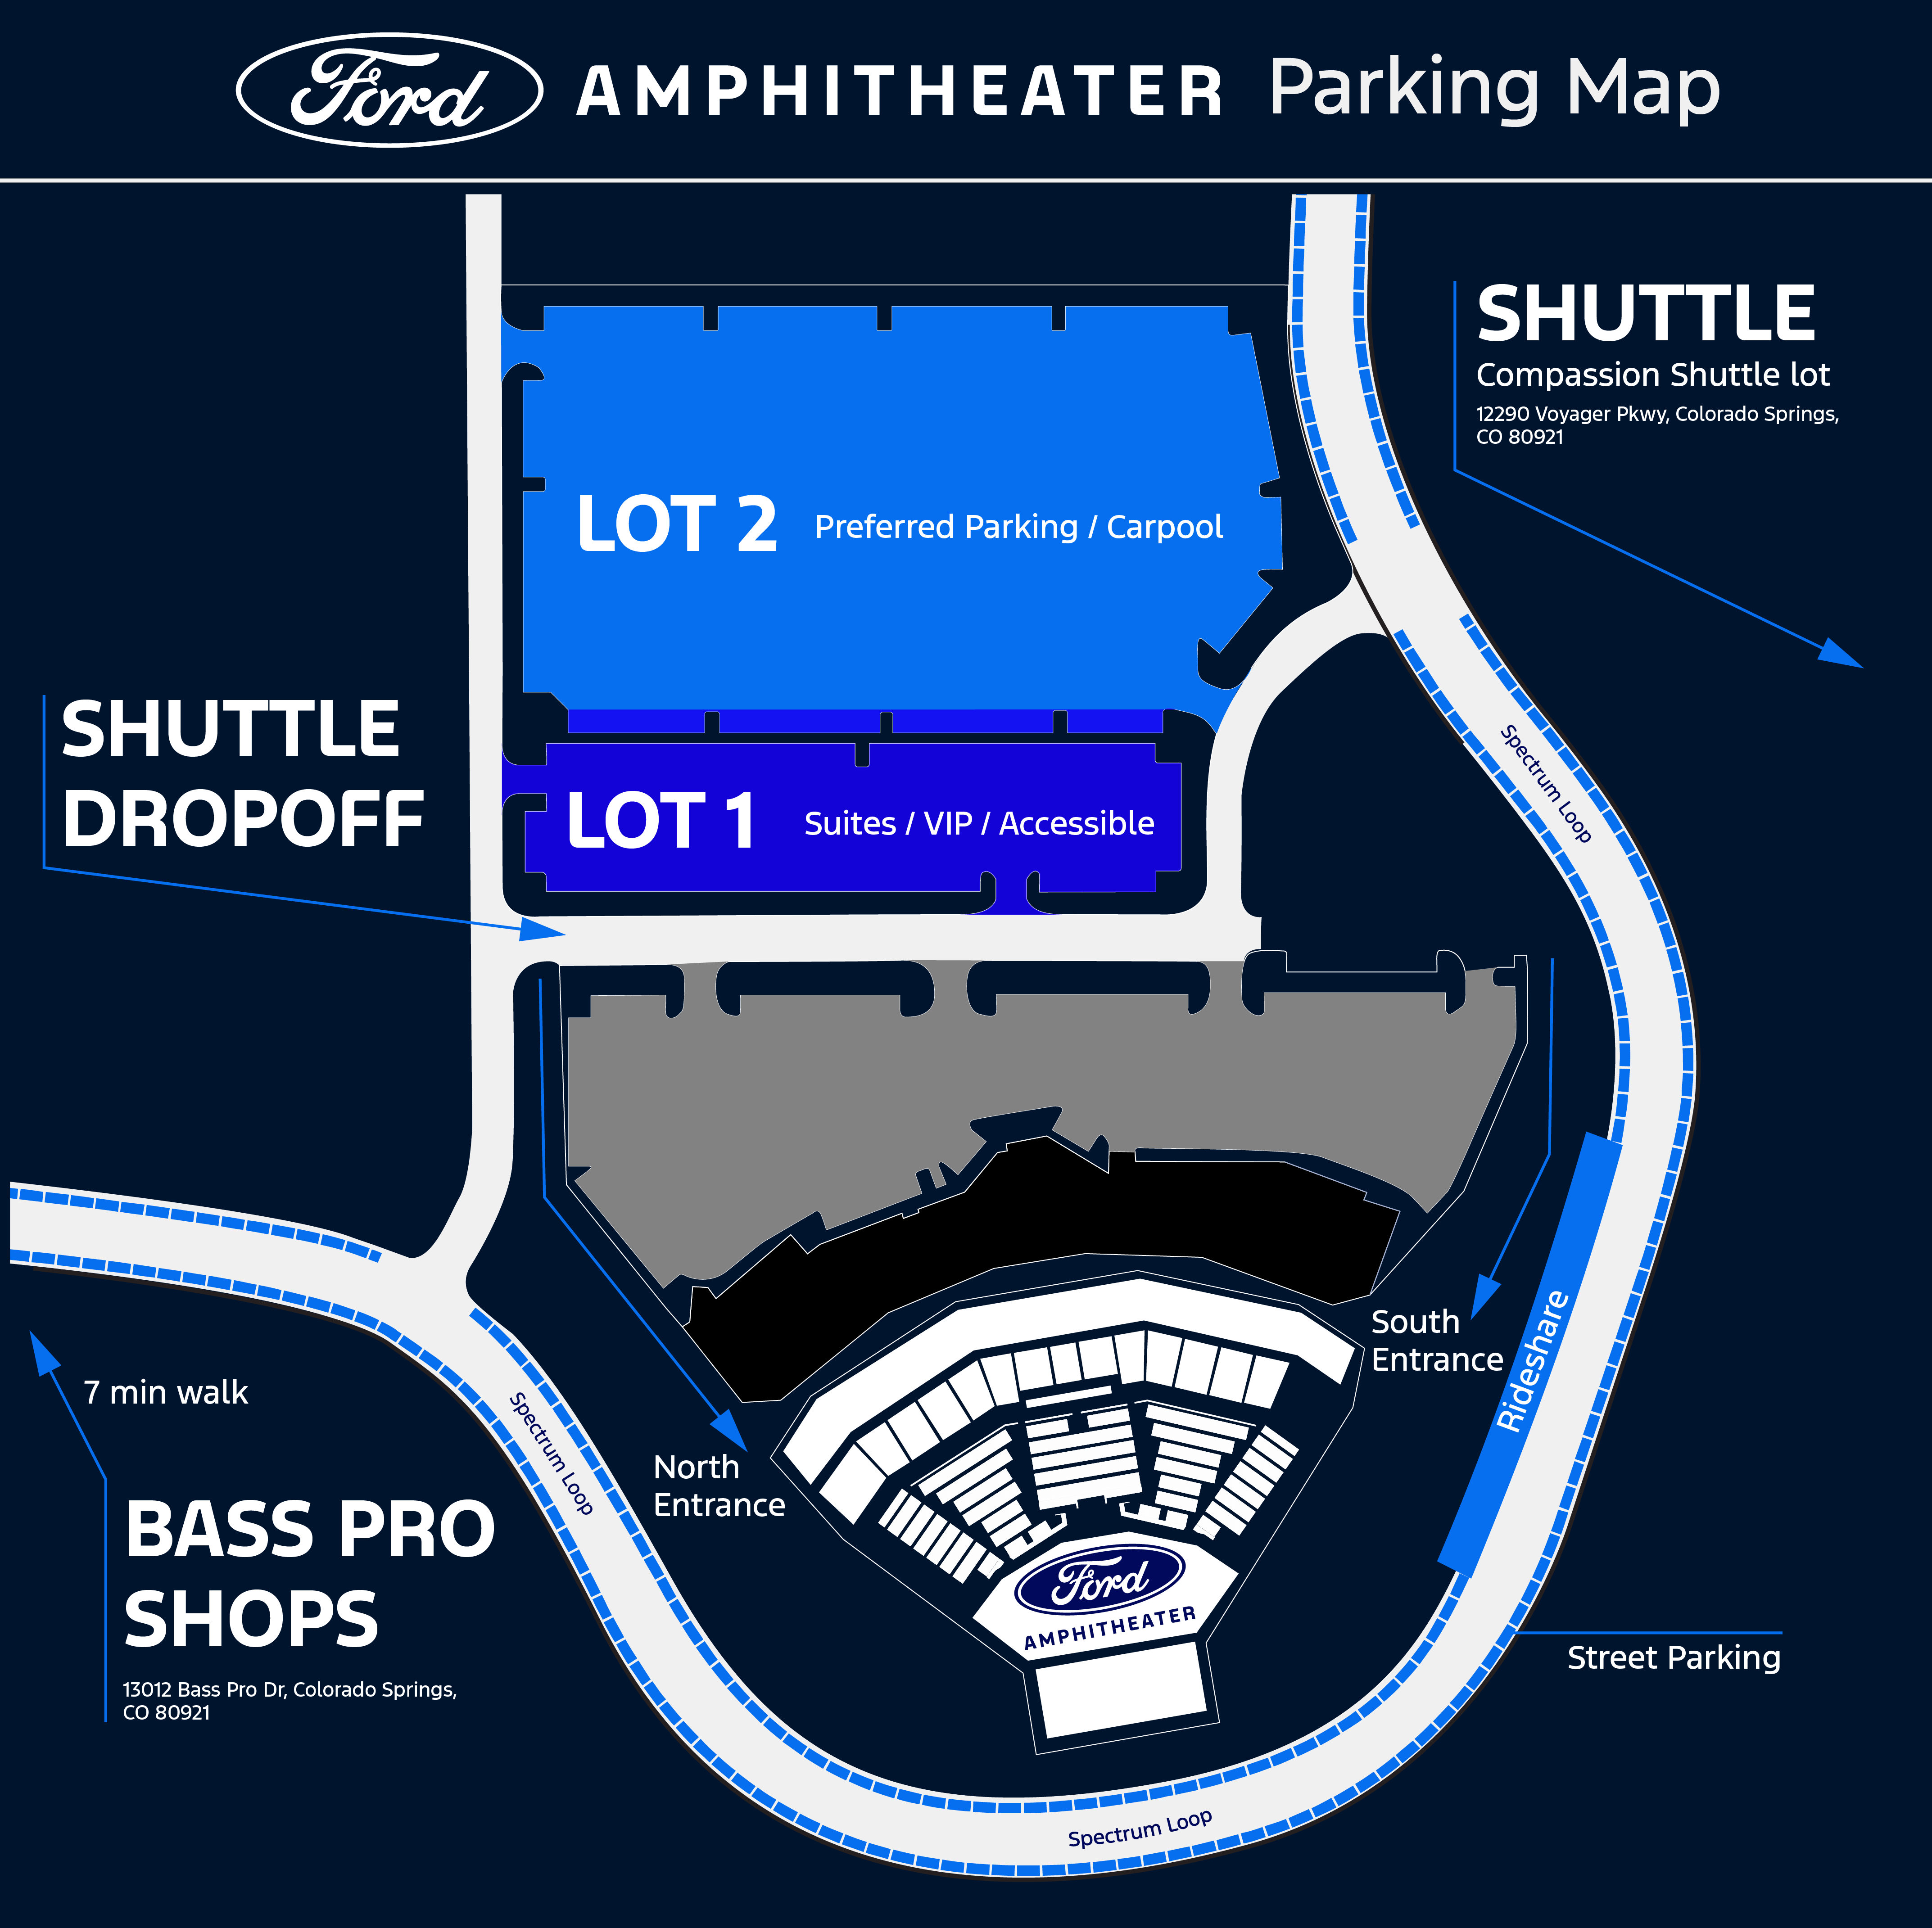 Ford Amphitheater Parking Guide